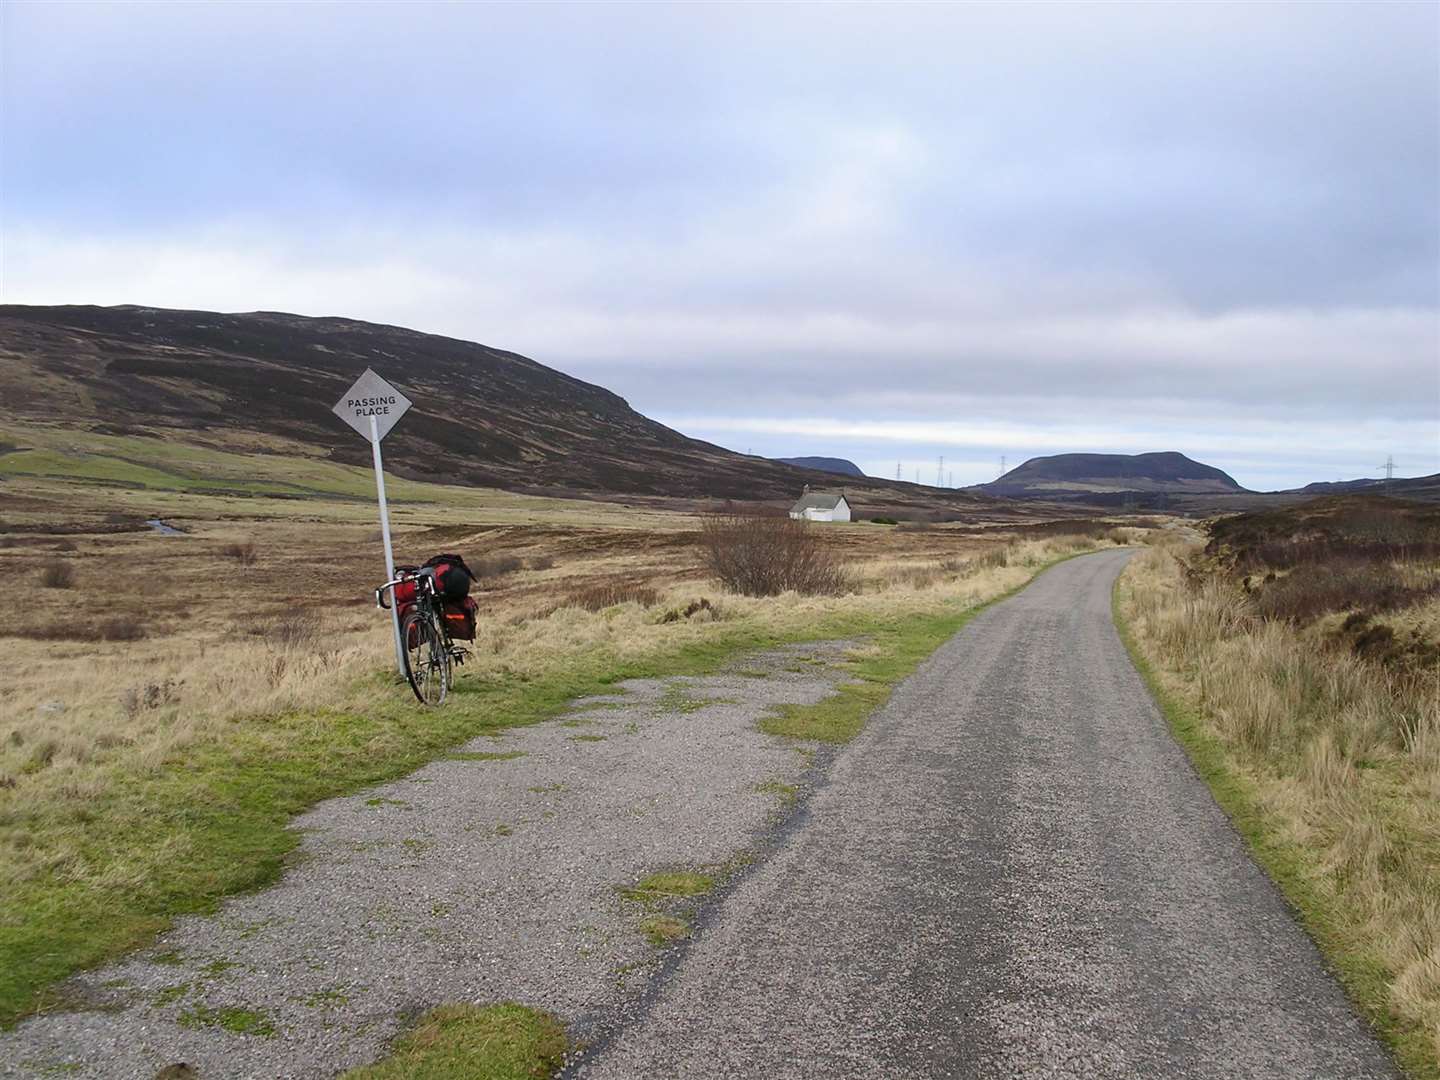 On the Loch Buidhe road.